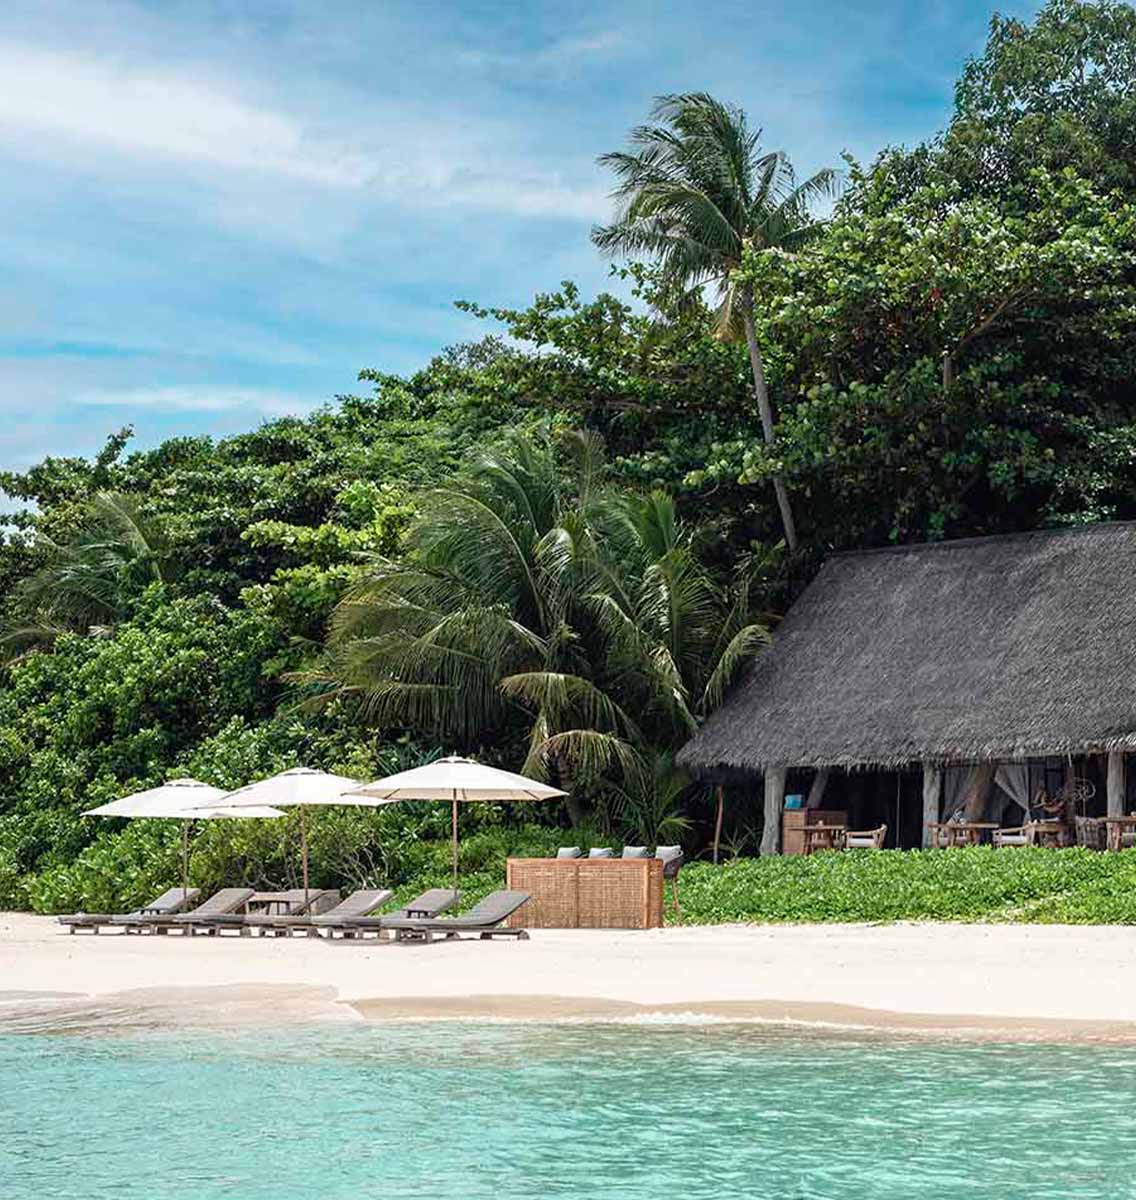 Elang Private Residence beach house, exclusive private island at Bawah Reserve, Indonesia.